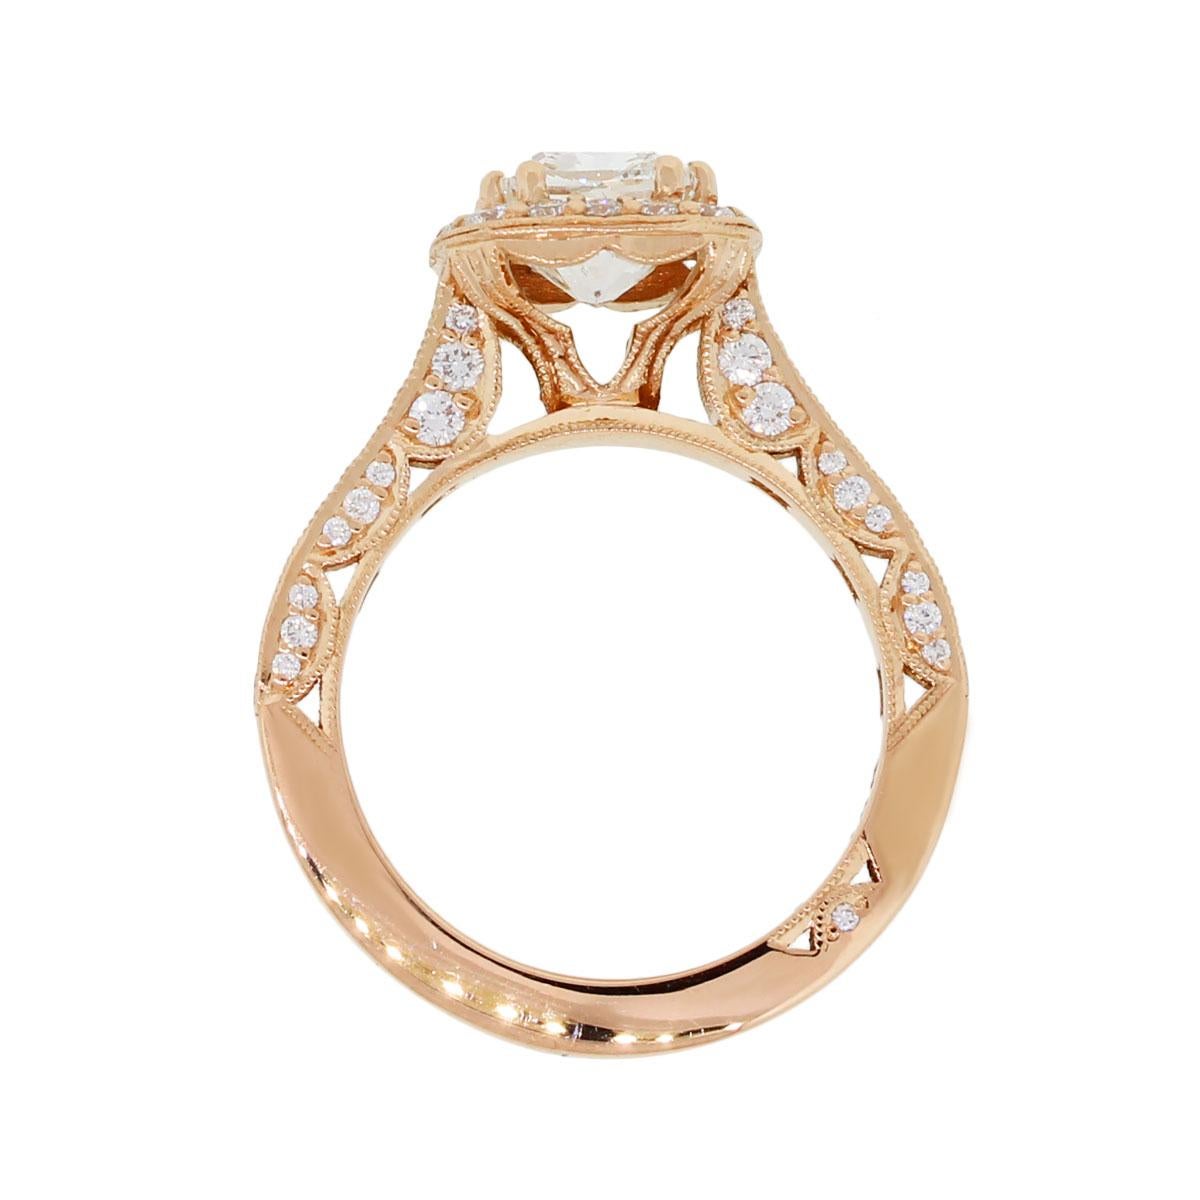 Designer: Tacori
Style #: HT2550
Material: 18k rose gold
Diamond Details: 2.01 carat GIA certified cushion cut diamond. Diamond is G in color and SI1 in clarity. GIA #5192155595
Mounting Diamond Details: Approximately 0.94ctw of round brilliant